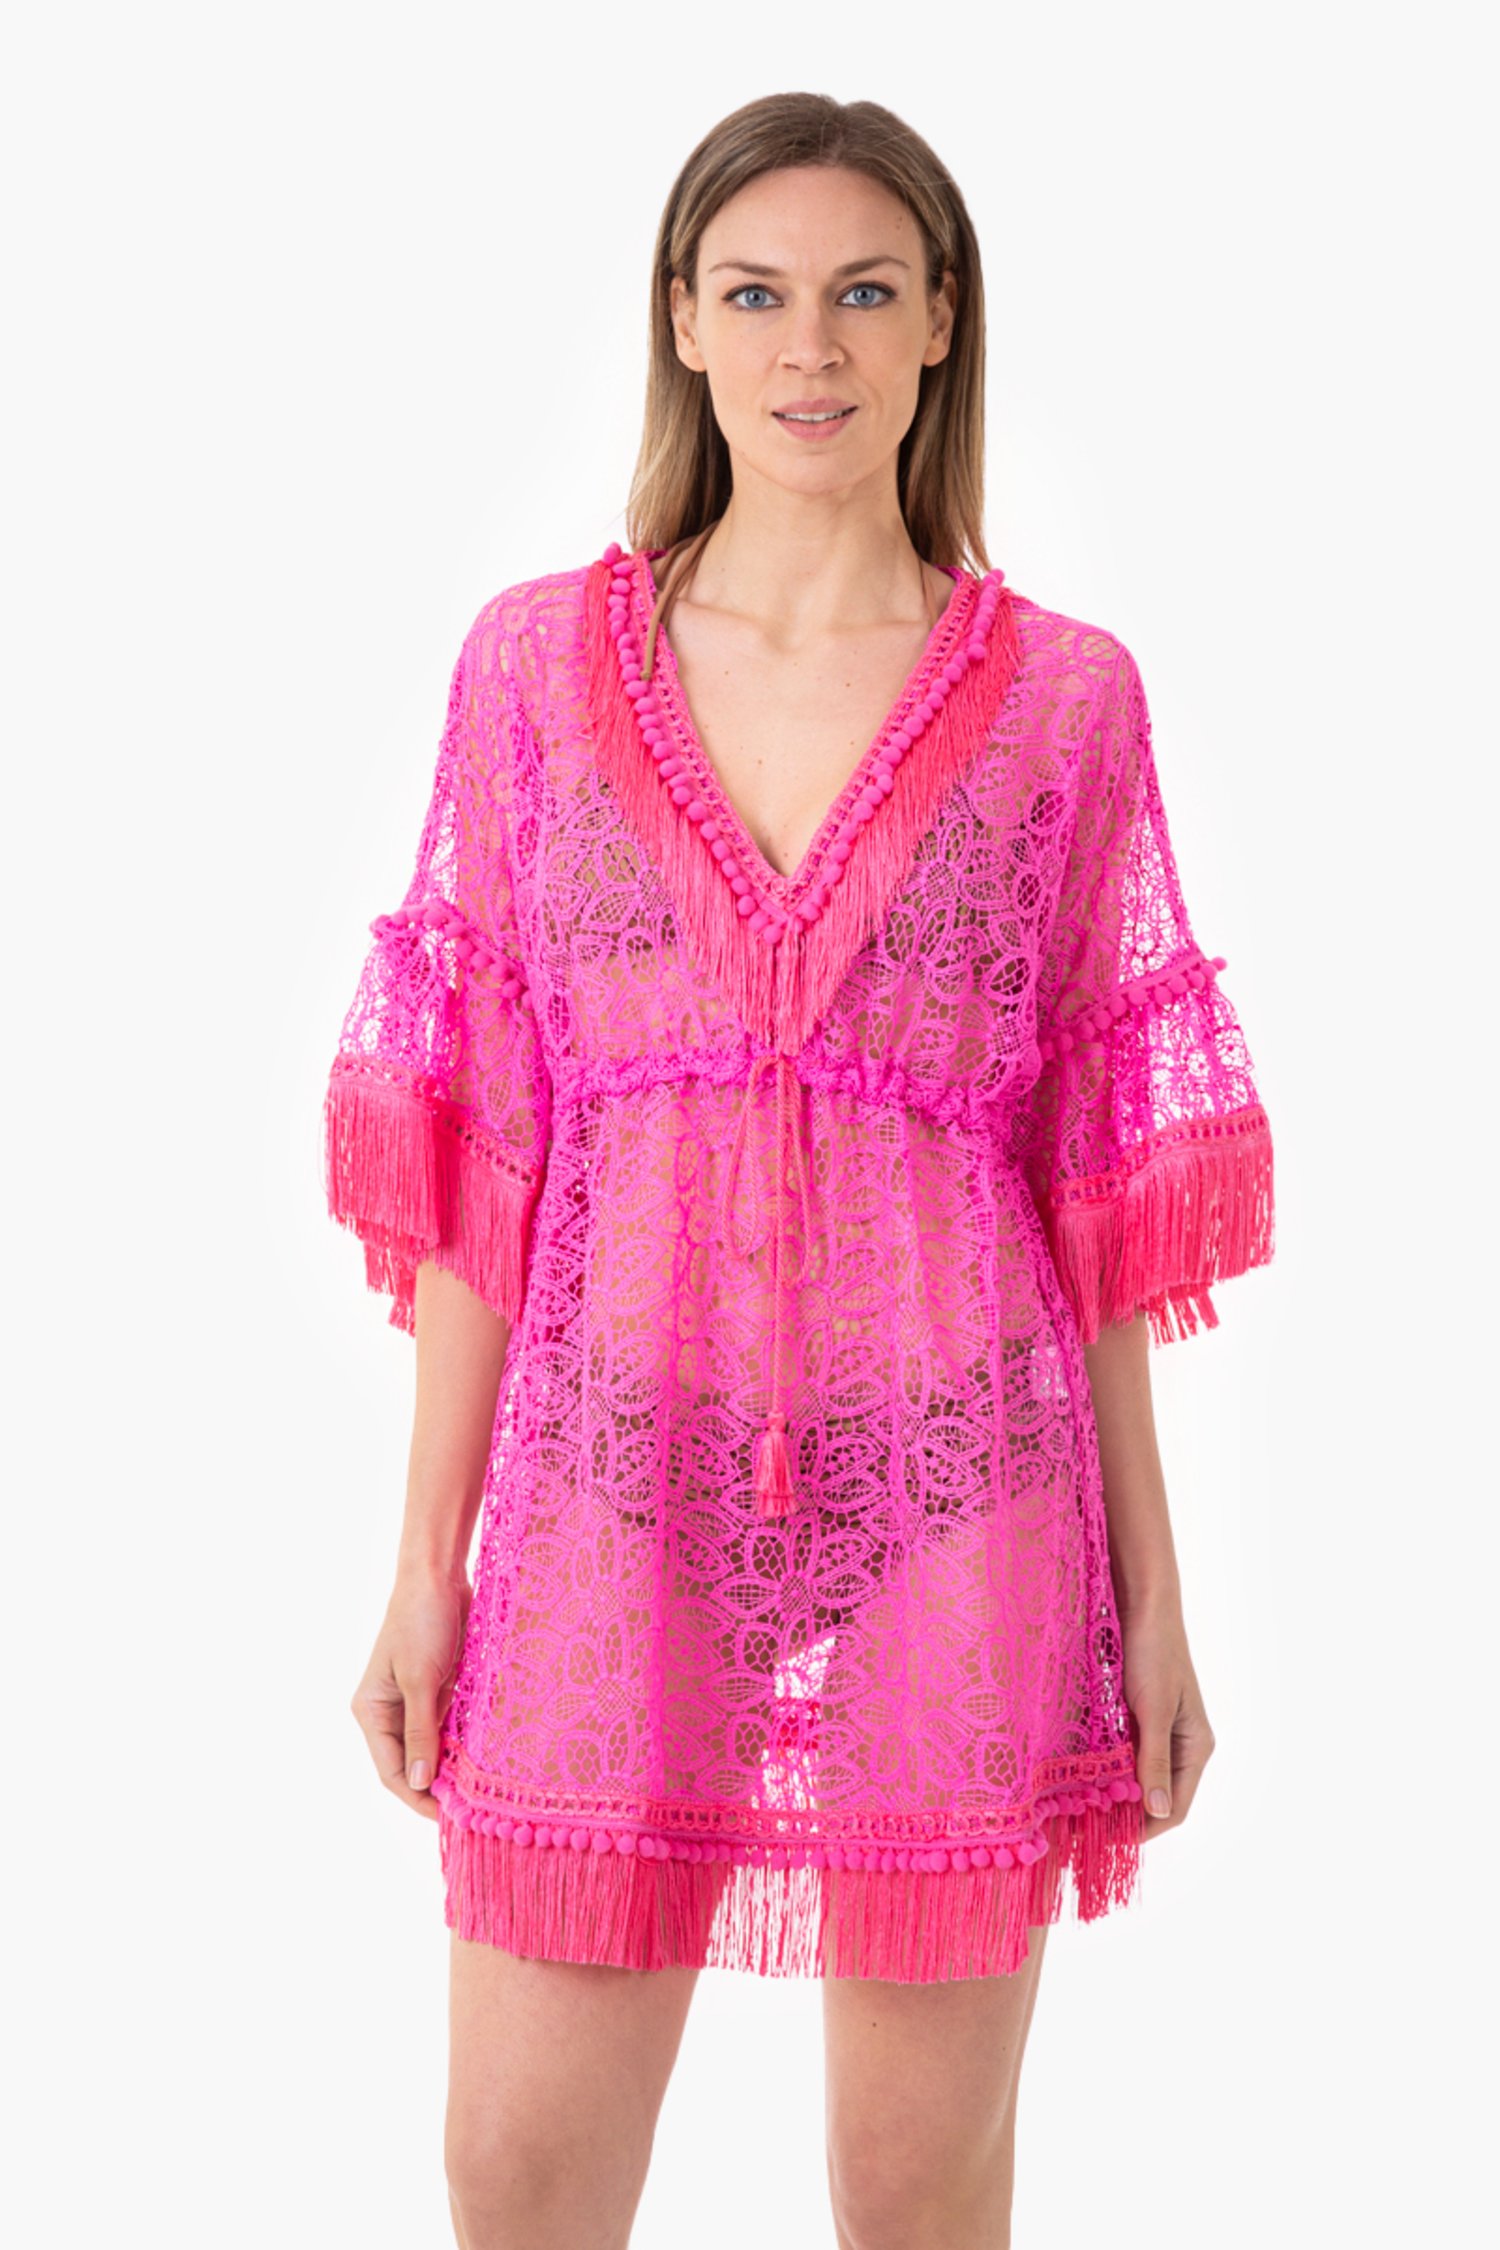 MACRAME' LACE SHORT KAFTAN WITH TRIMMING DETAILS - Pizzo Macrame' Camelia